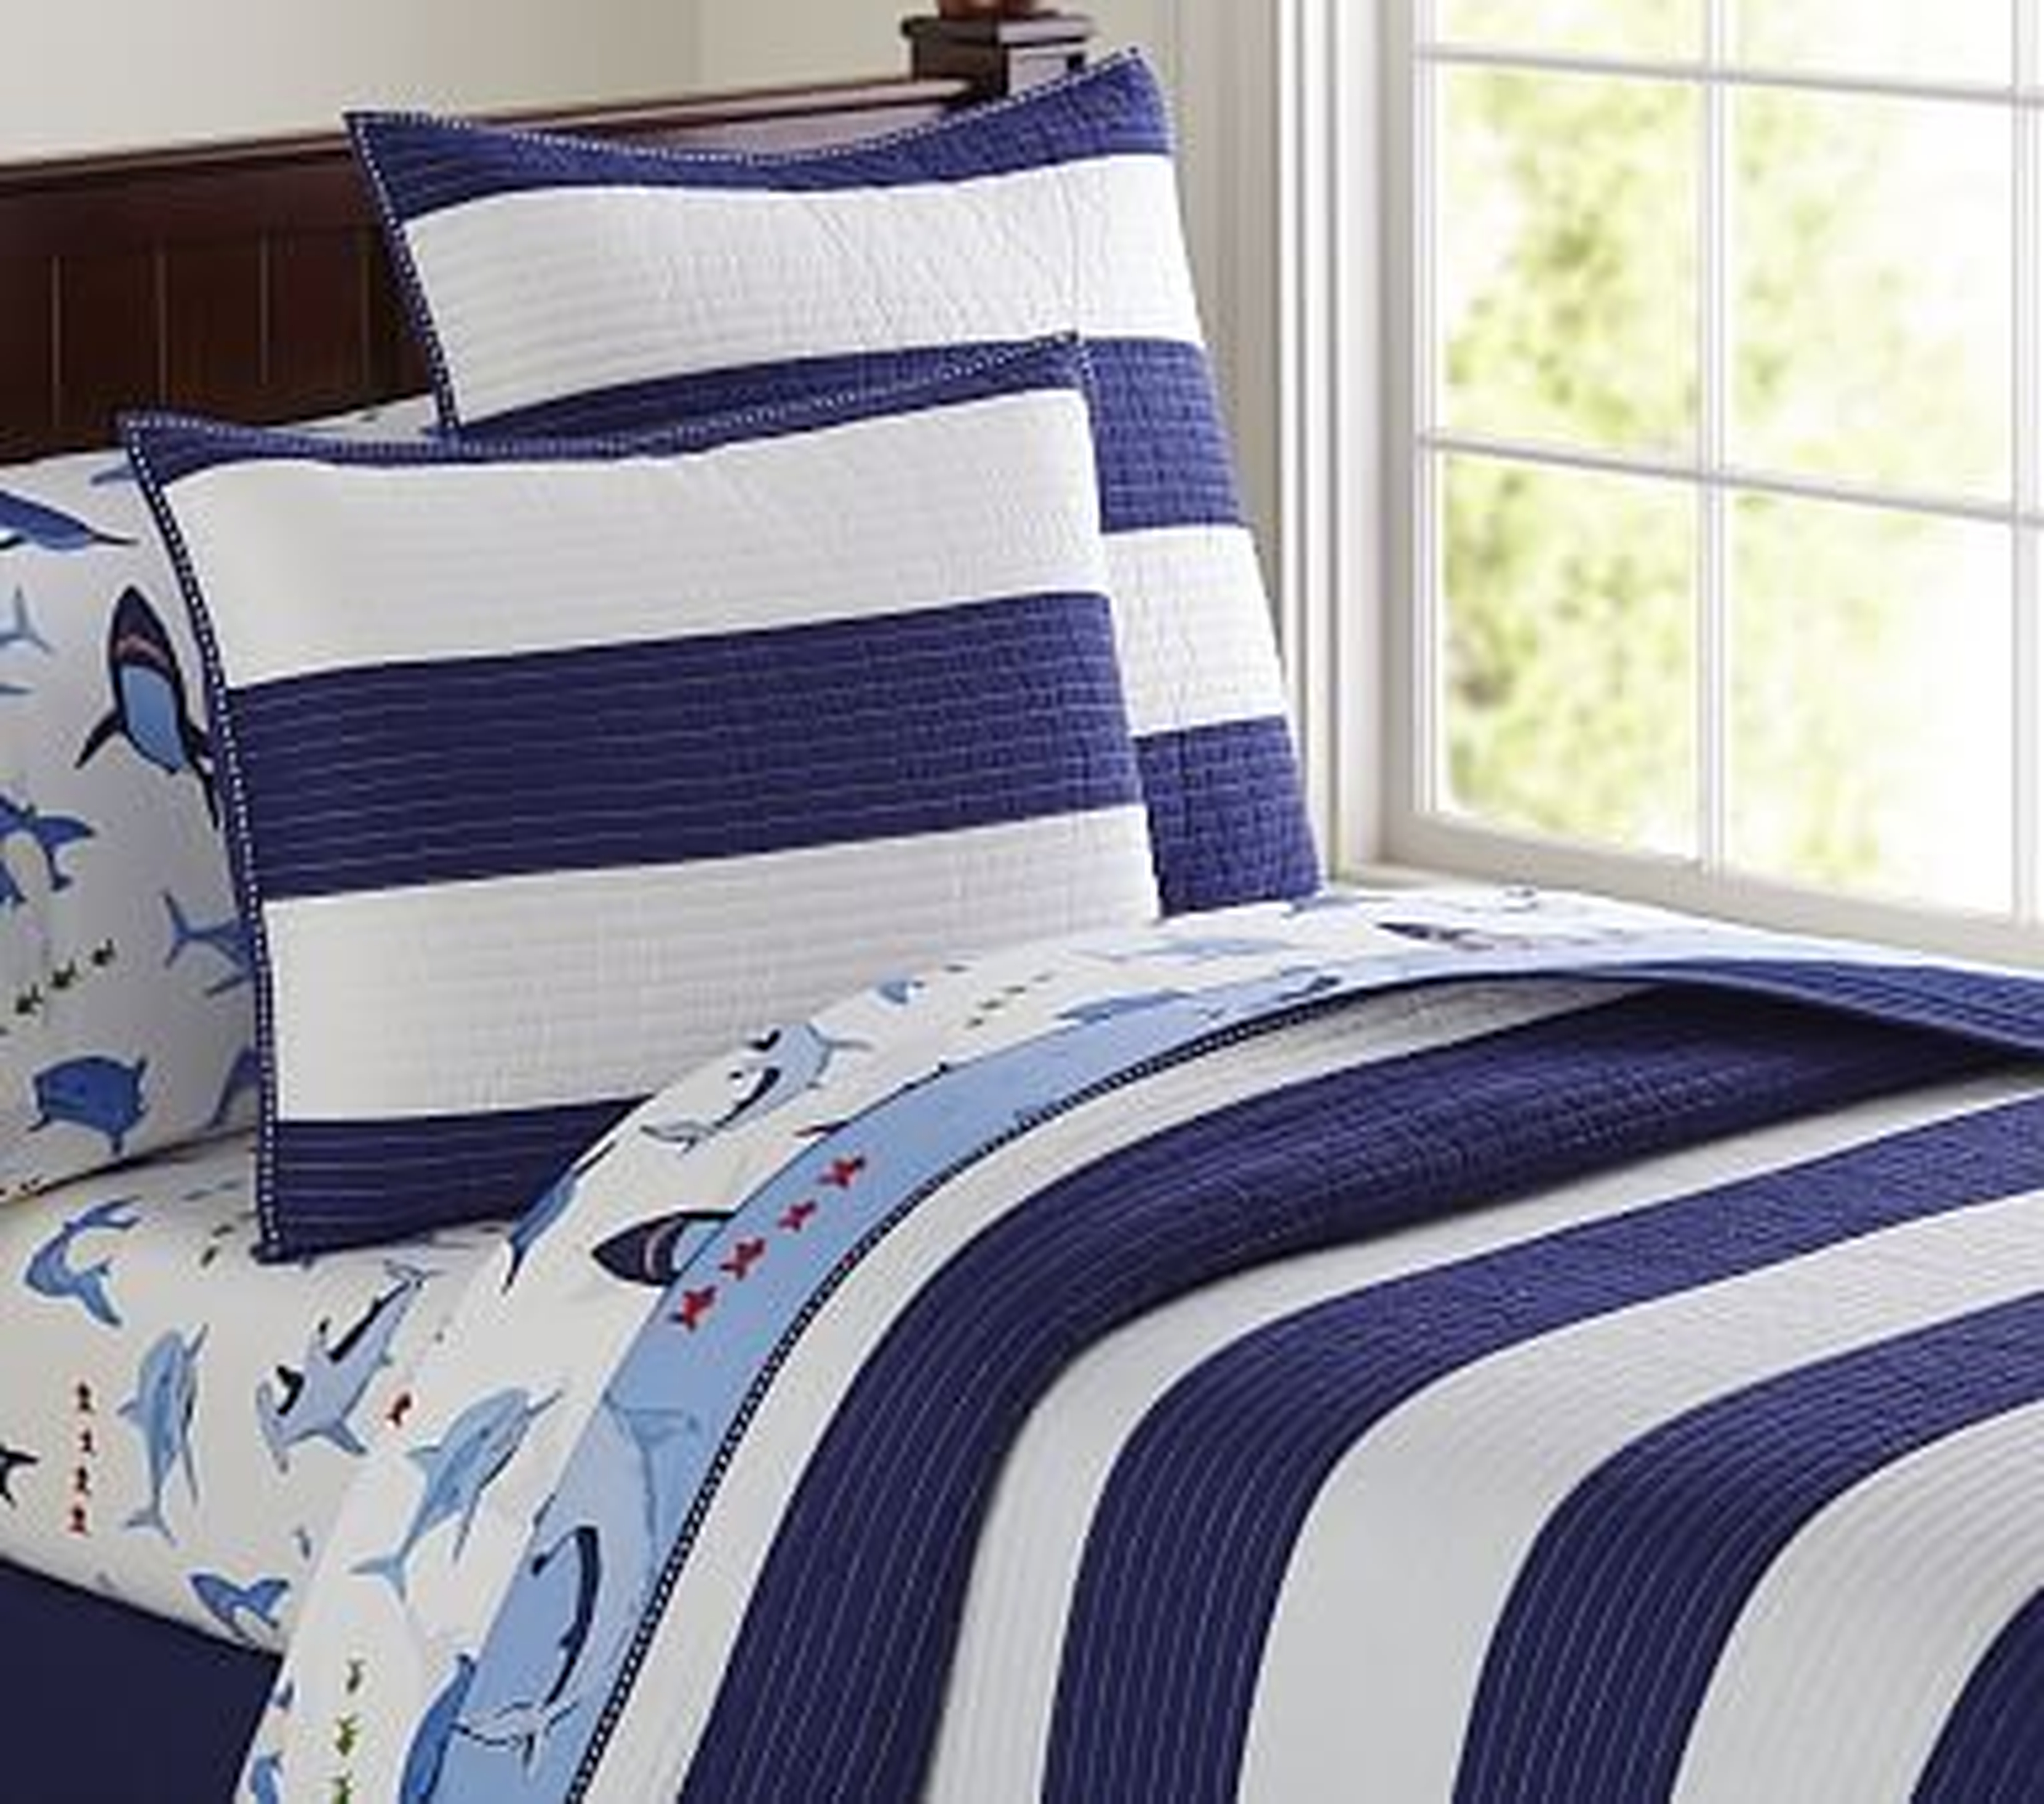 Rugby Stripe Quilt, Twin, Navy/White - Pottery Barn Kids